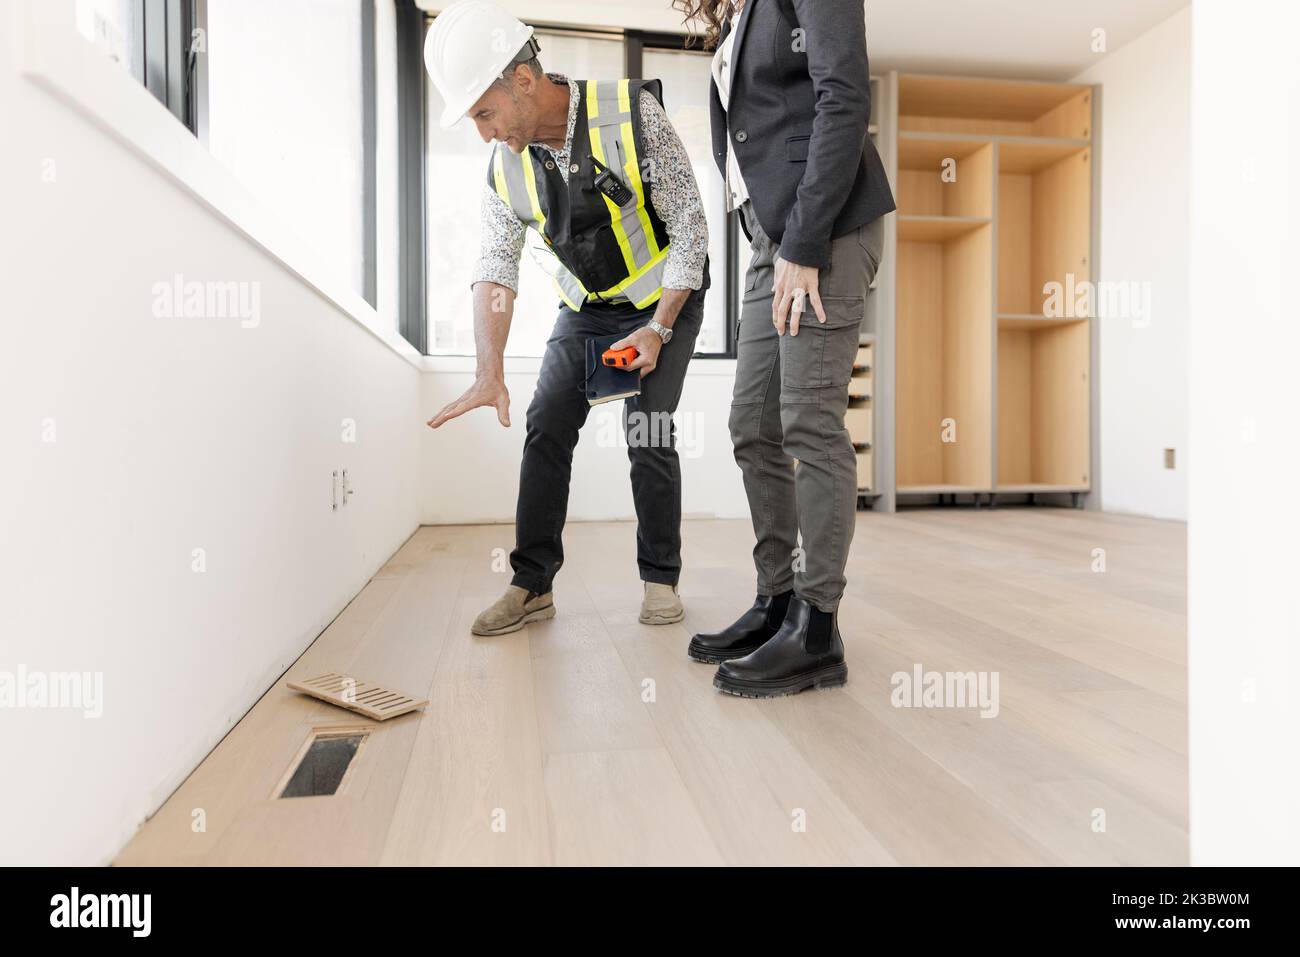 Architects looking at wood flooring in new house under construction Stock Photo